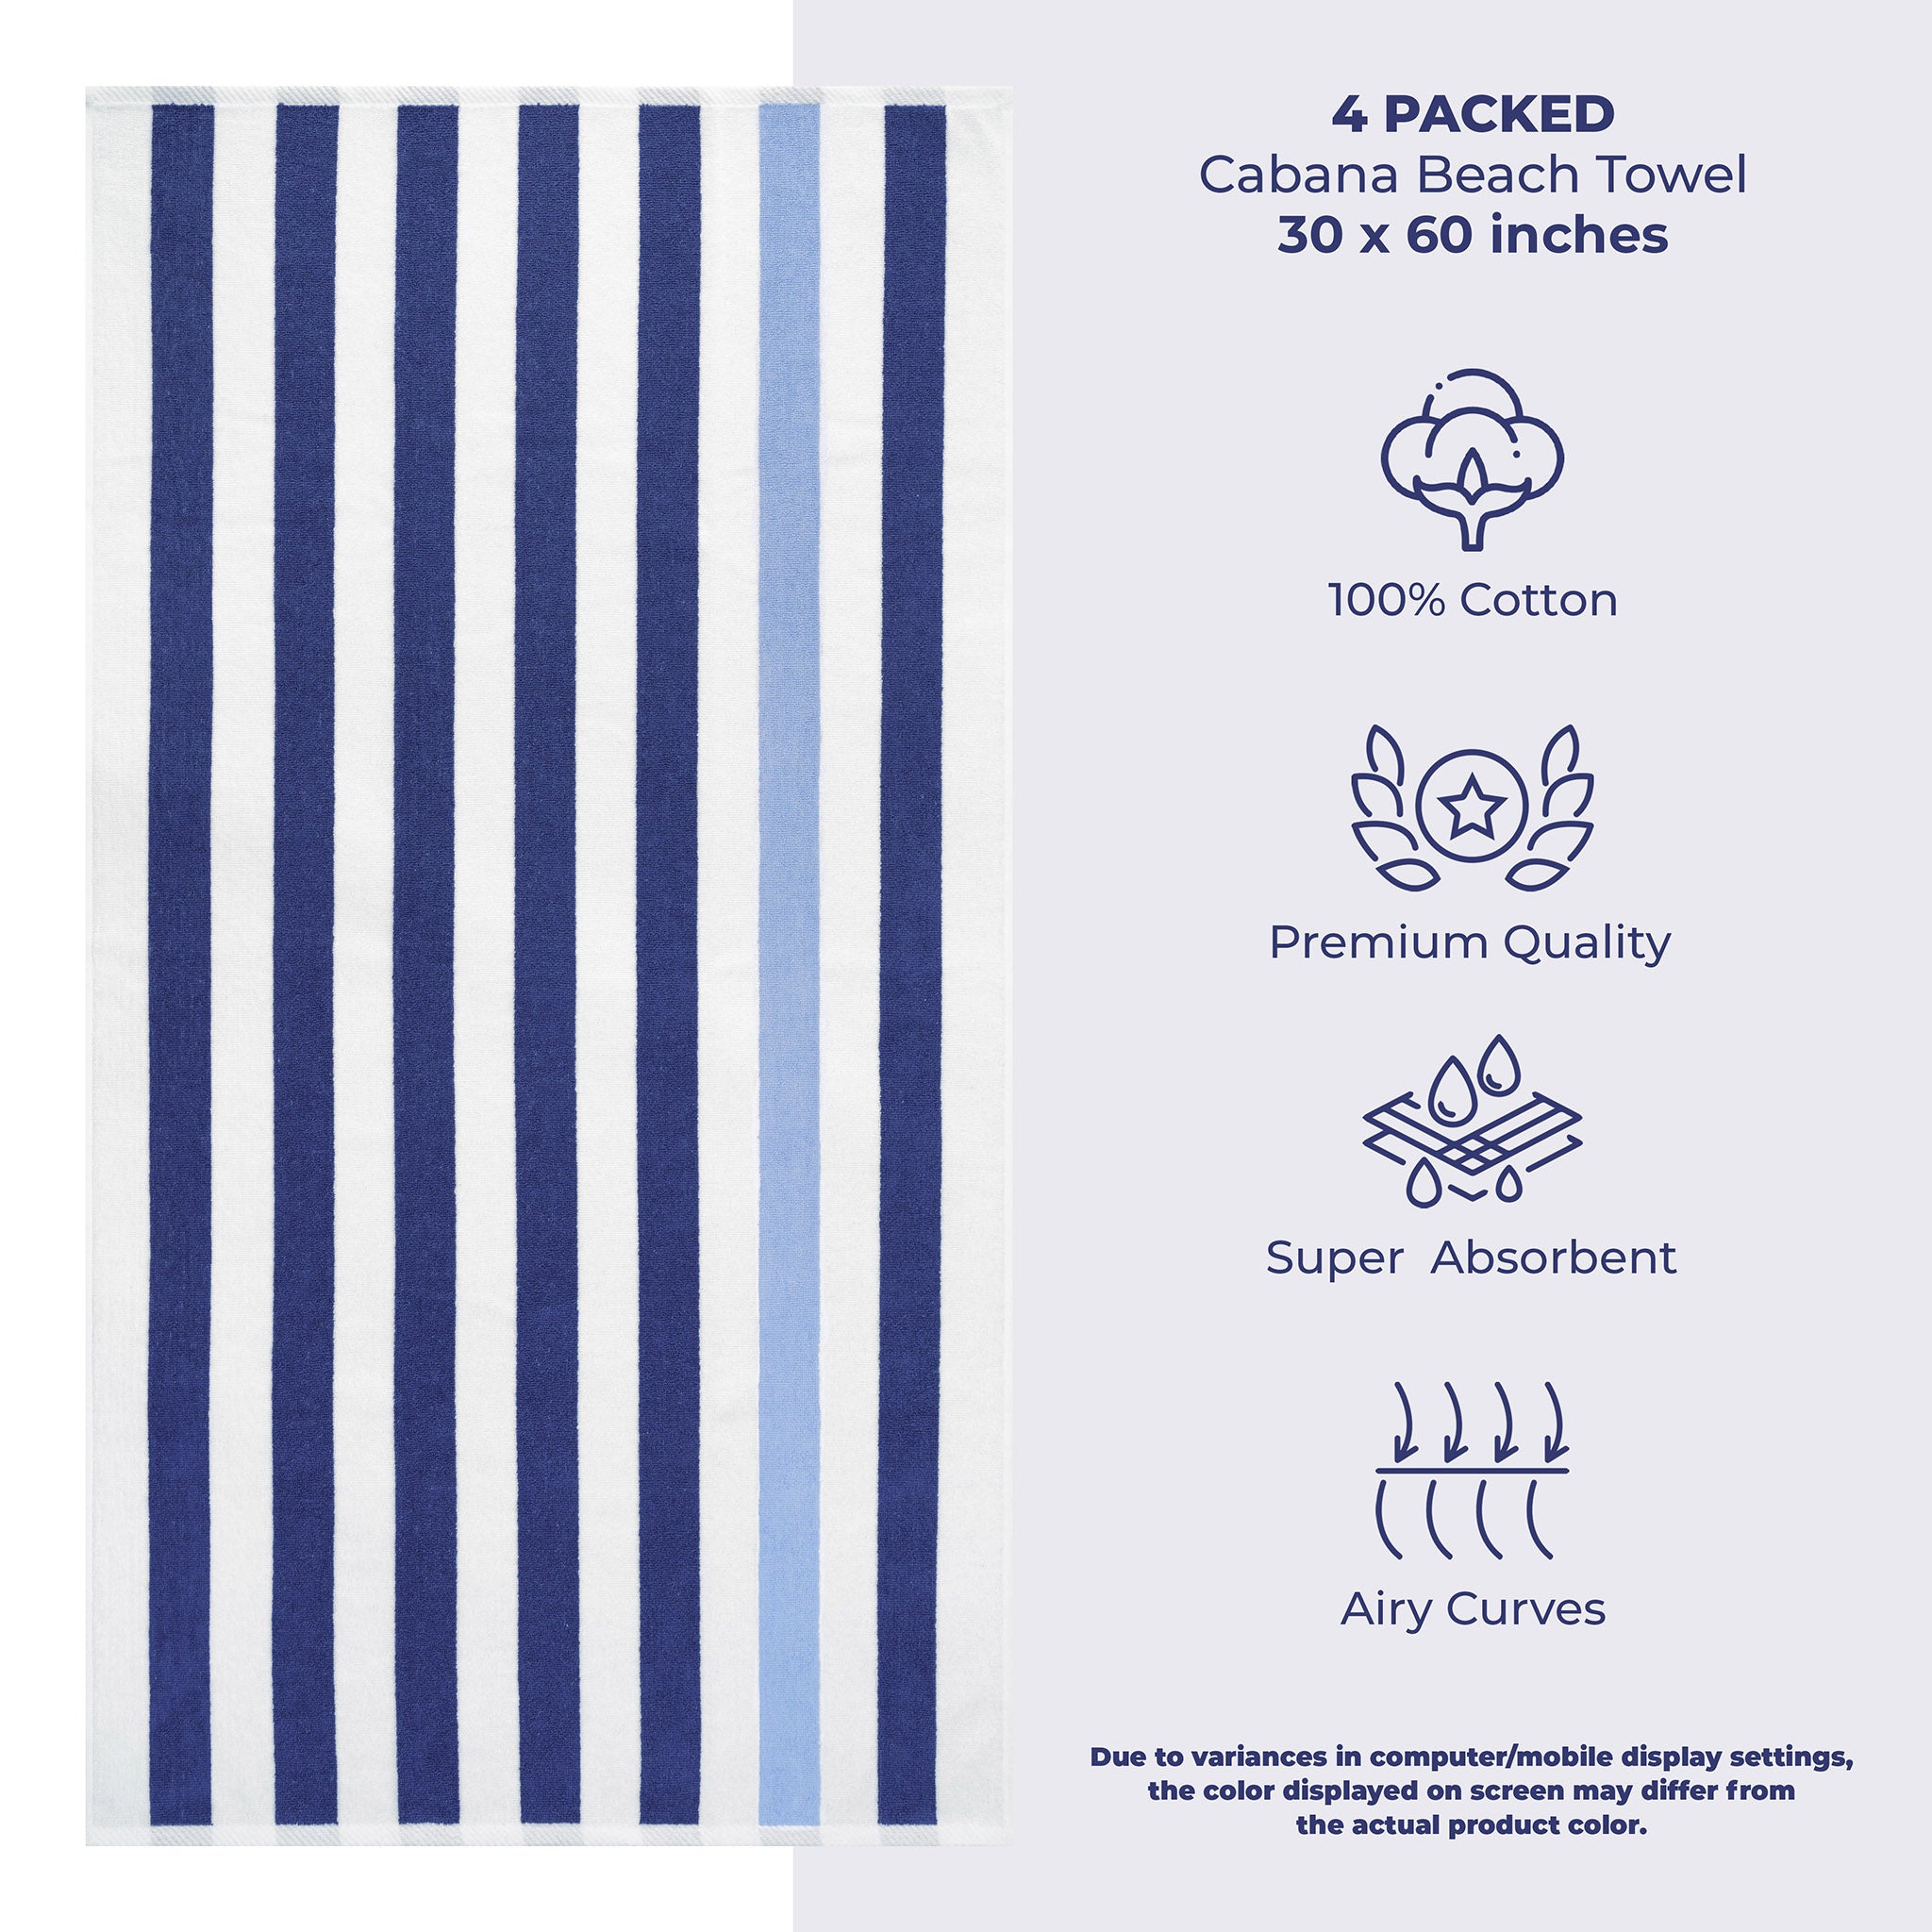 American Soft Linen 100% Cotton 4 Pack Beach Towels Cabana Striped Pool Towels -navy-sky-3